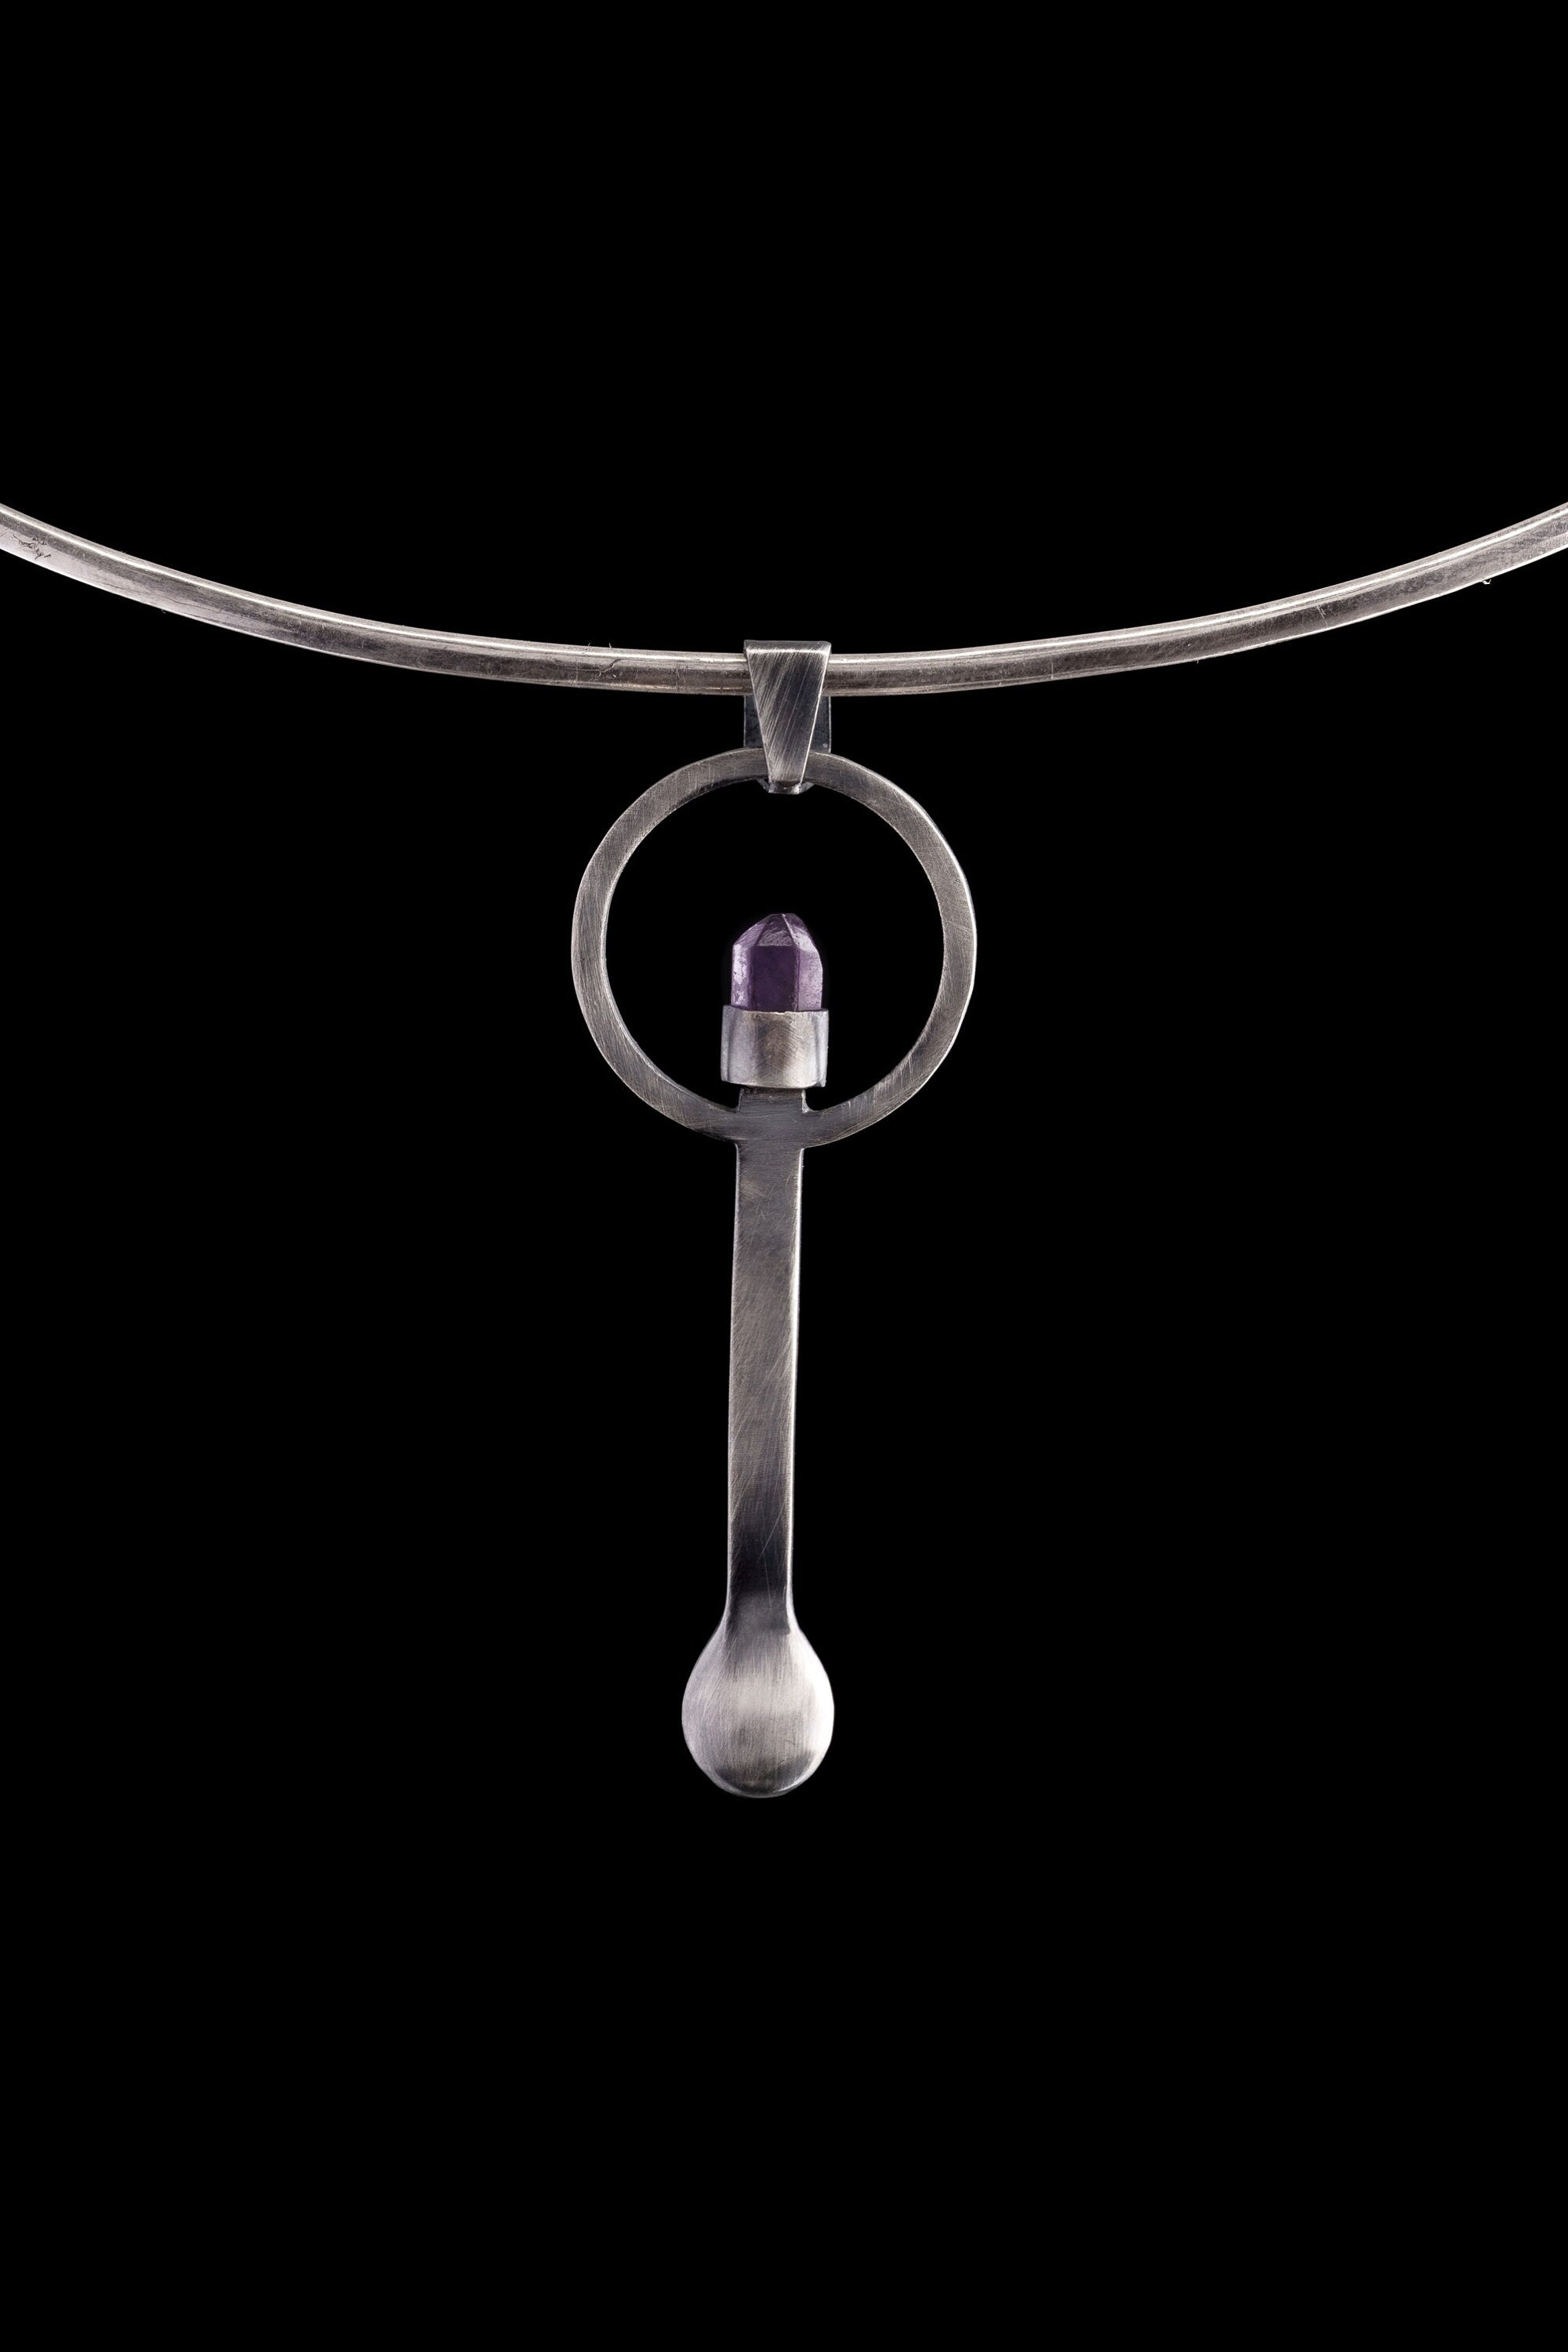 Amethyst Generator Point - Spice / Ceremonial Spoon - 925 Cast Silver - Oxidised Brush and Hammered Textured - Crystal Pendant Necklace